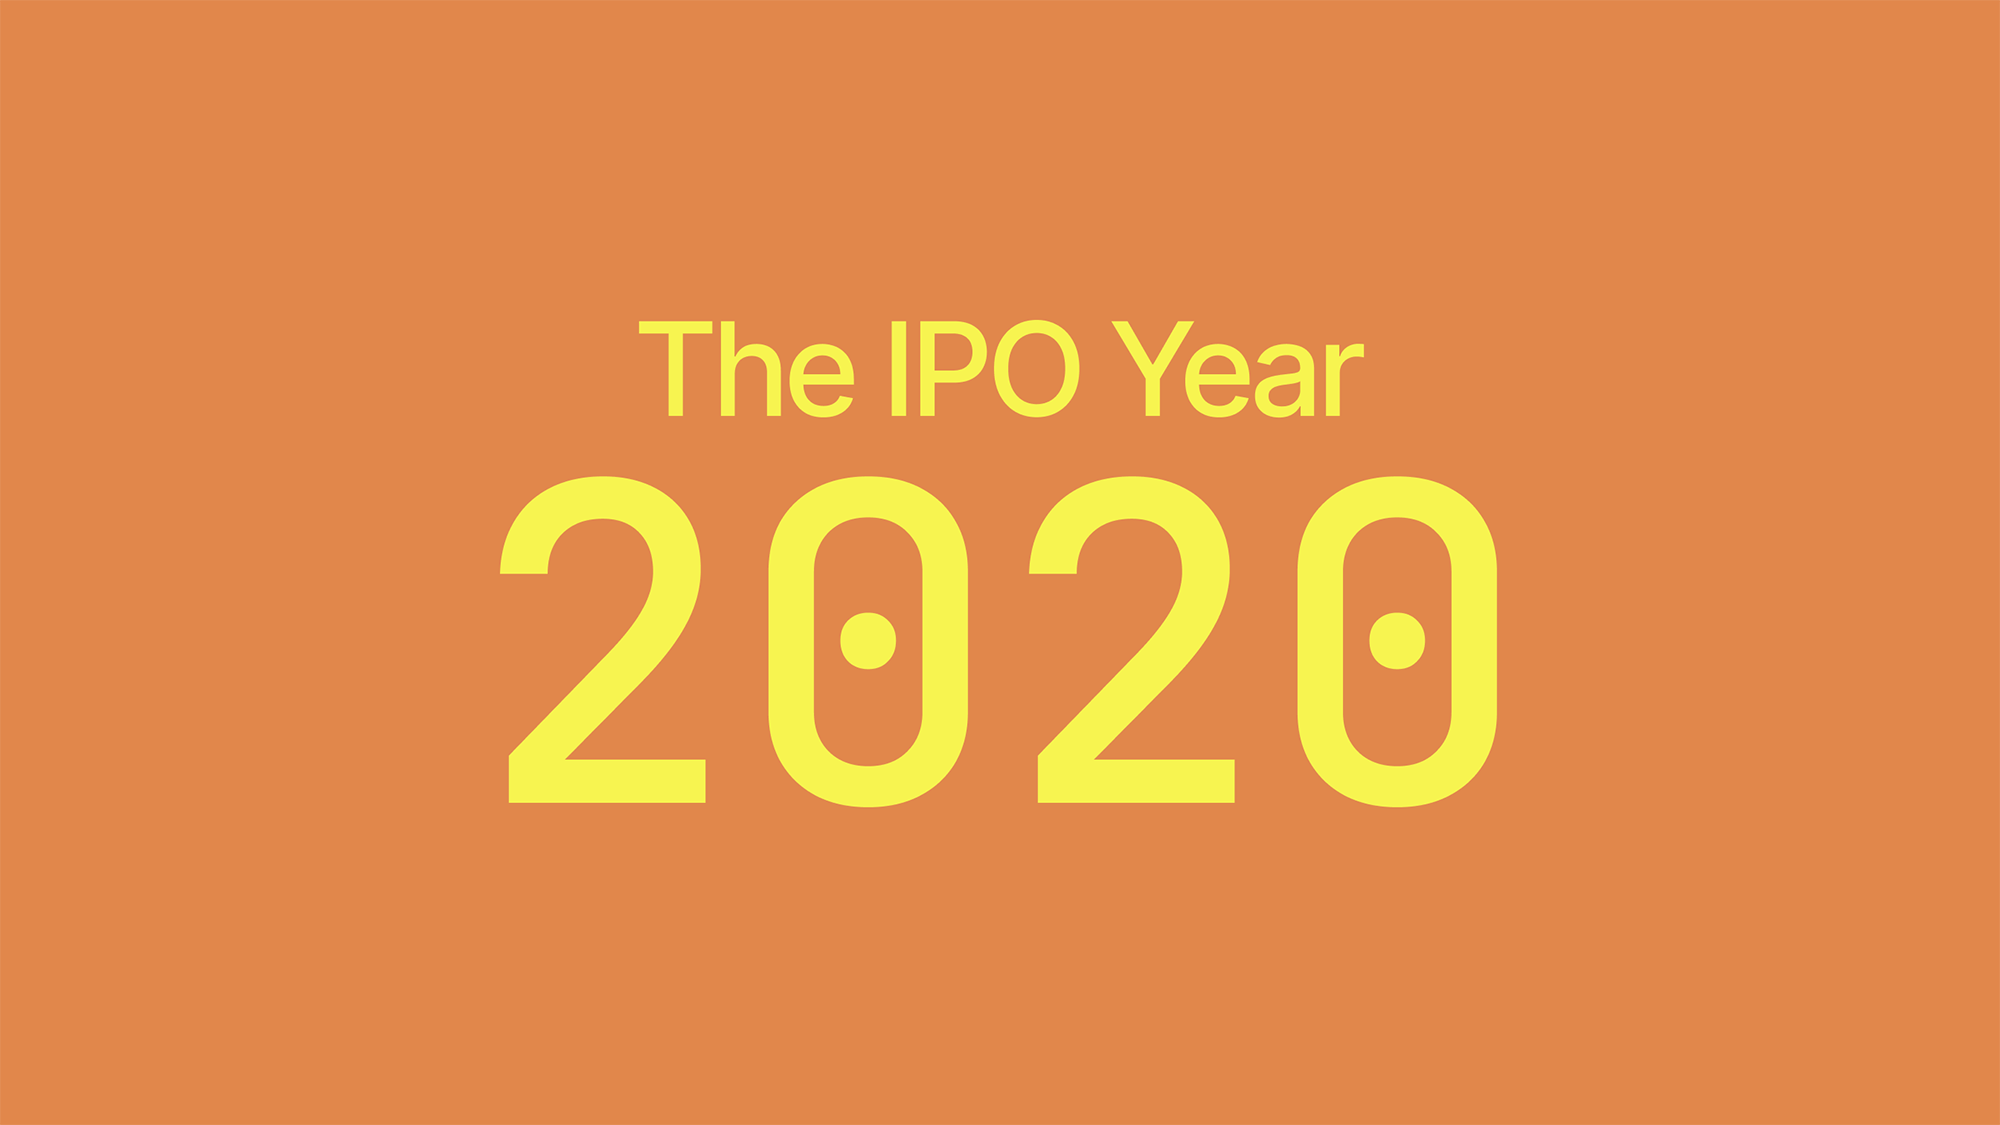 The IPO Year 2020